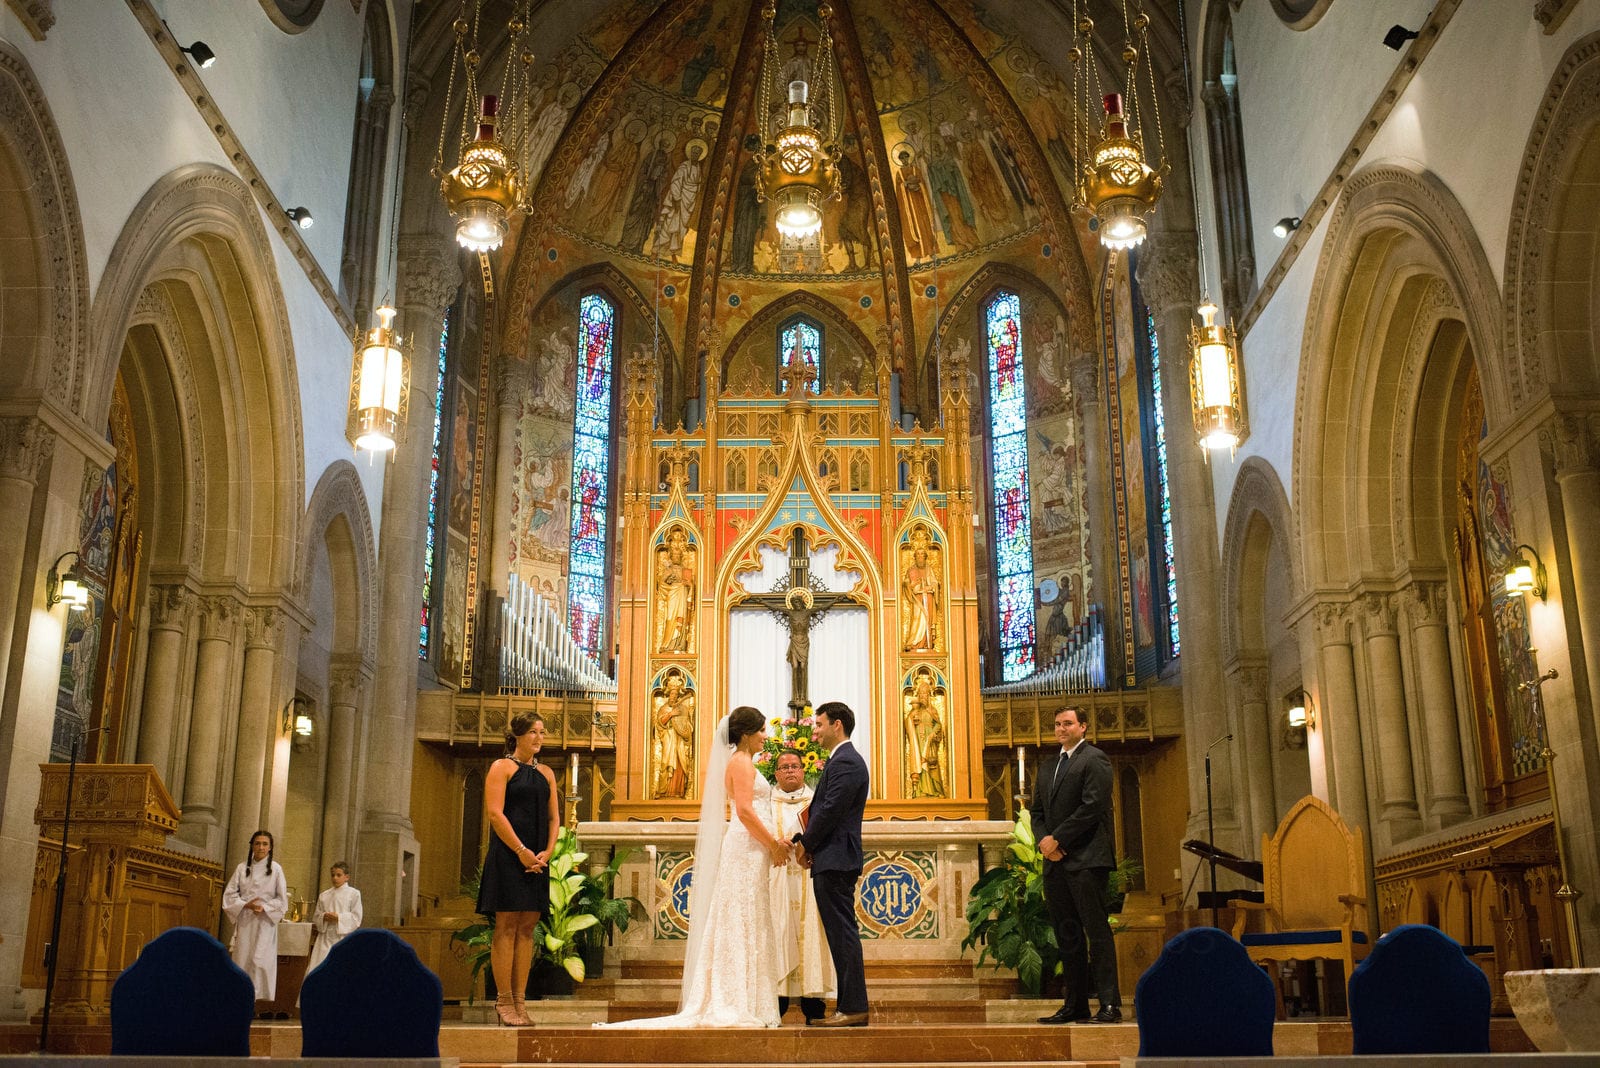 A gold-gilded altar with a bride and groom standing hand in hand in front of a priest Wedding Photography at Fairmont Hotel Pittsburgh.